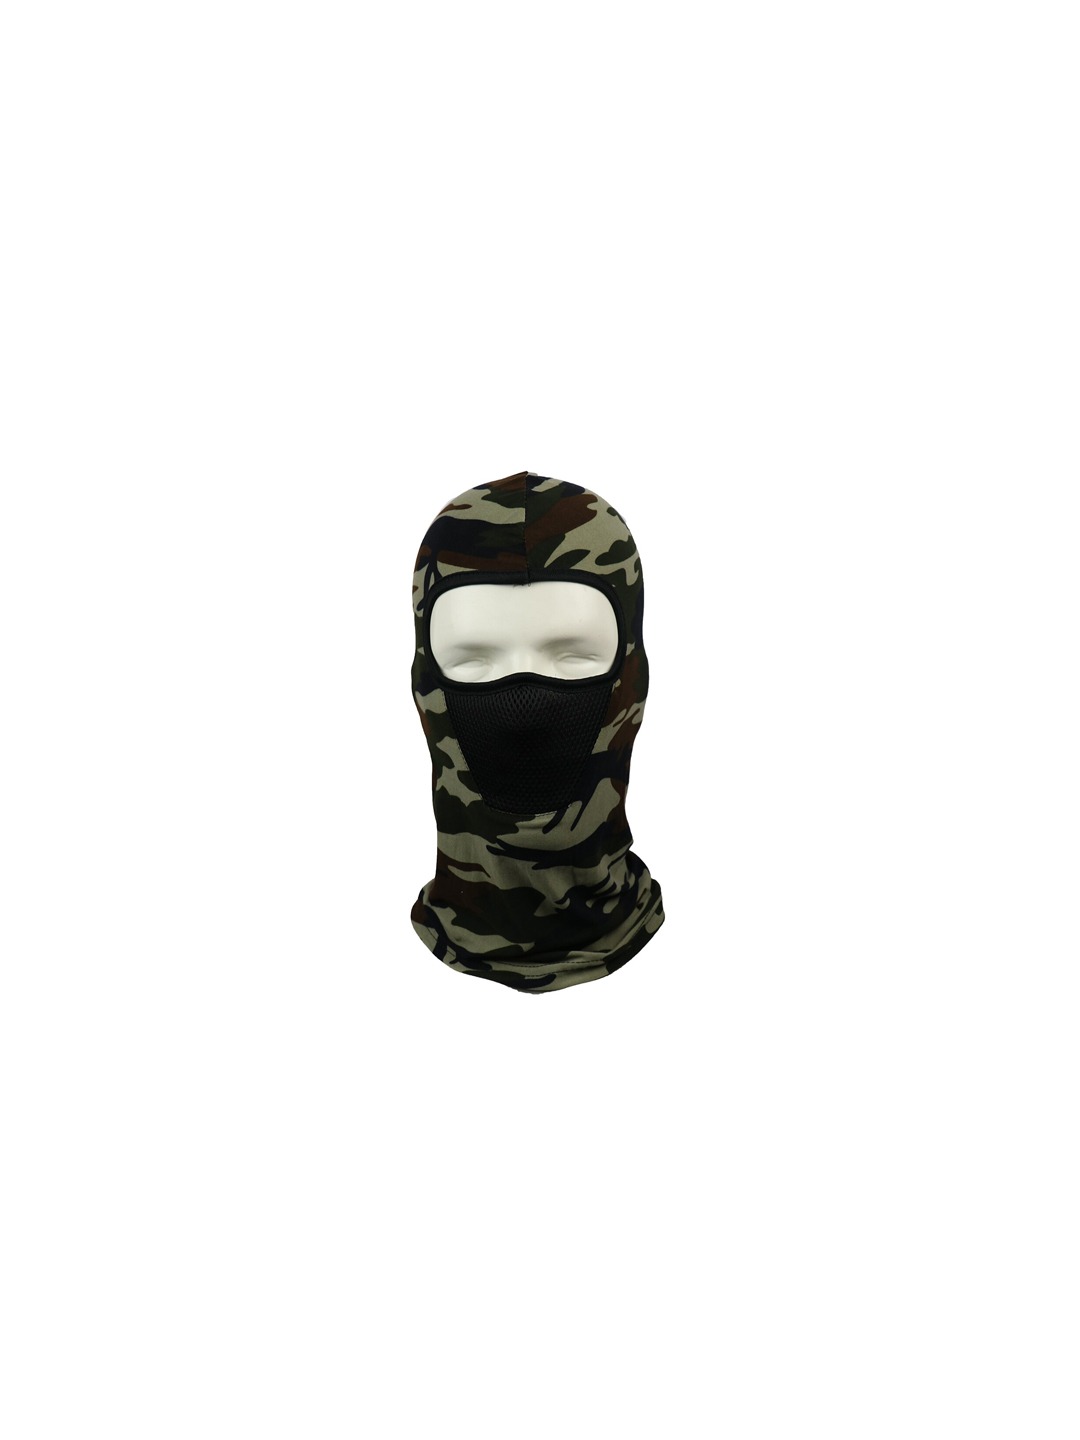 Accessories Caps | iSWEVEN Unisex Green & Brown Camouflage Printed Balaclavas Mask - HT87622